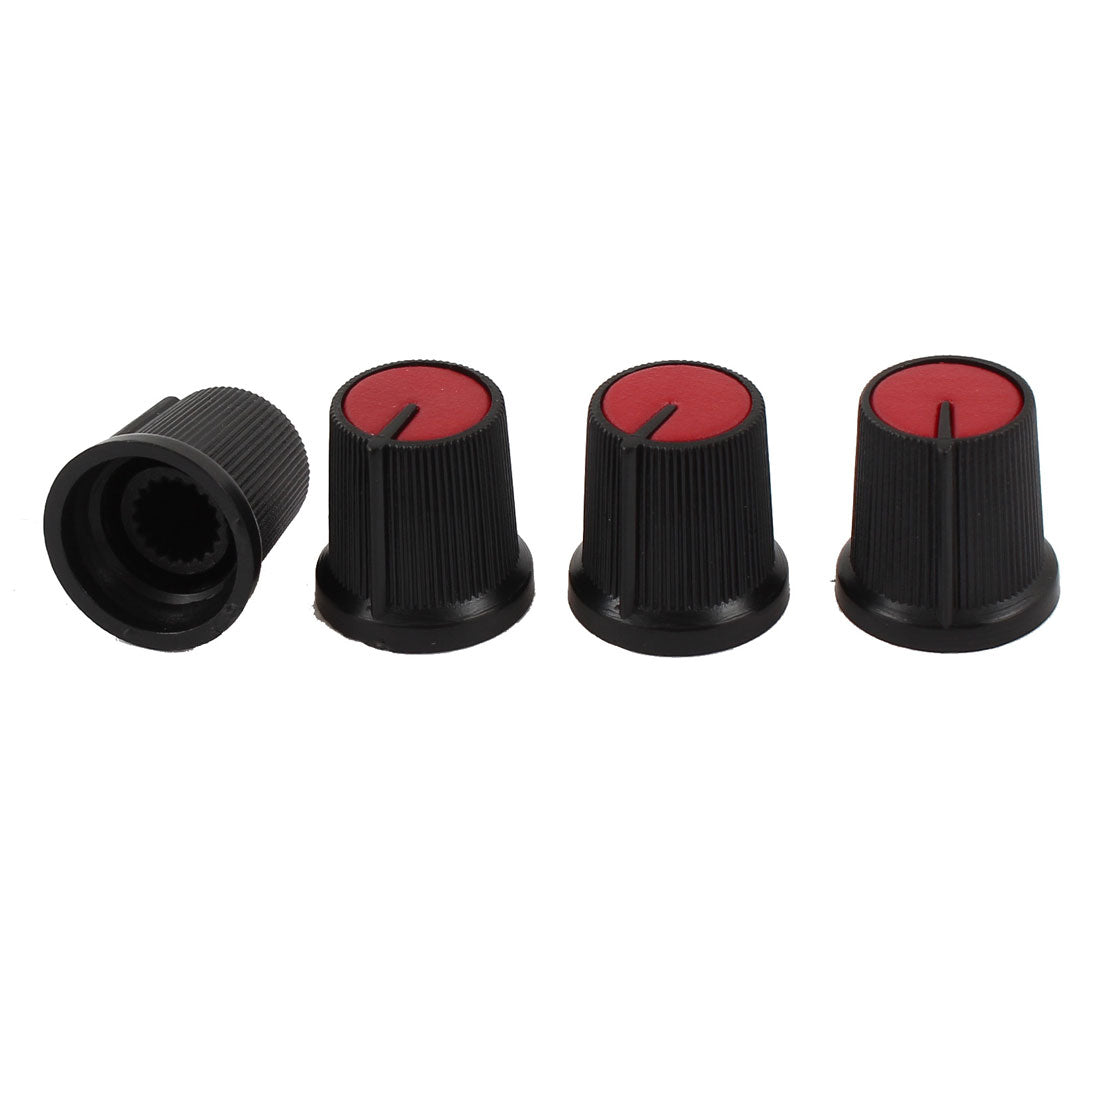 uxcell Uxcell 4pcs Plastic 5.5mm Knurled Shaft Taper Volume Knob Cap Black Red for Potentiometer Pot